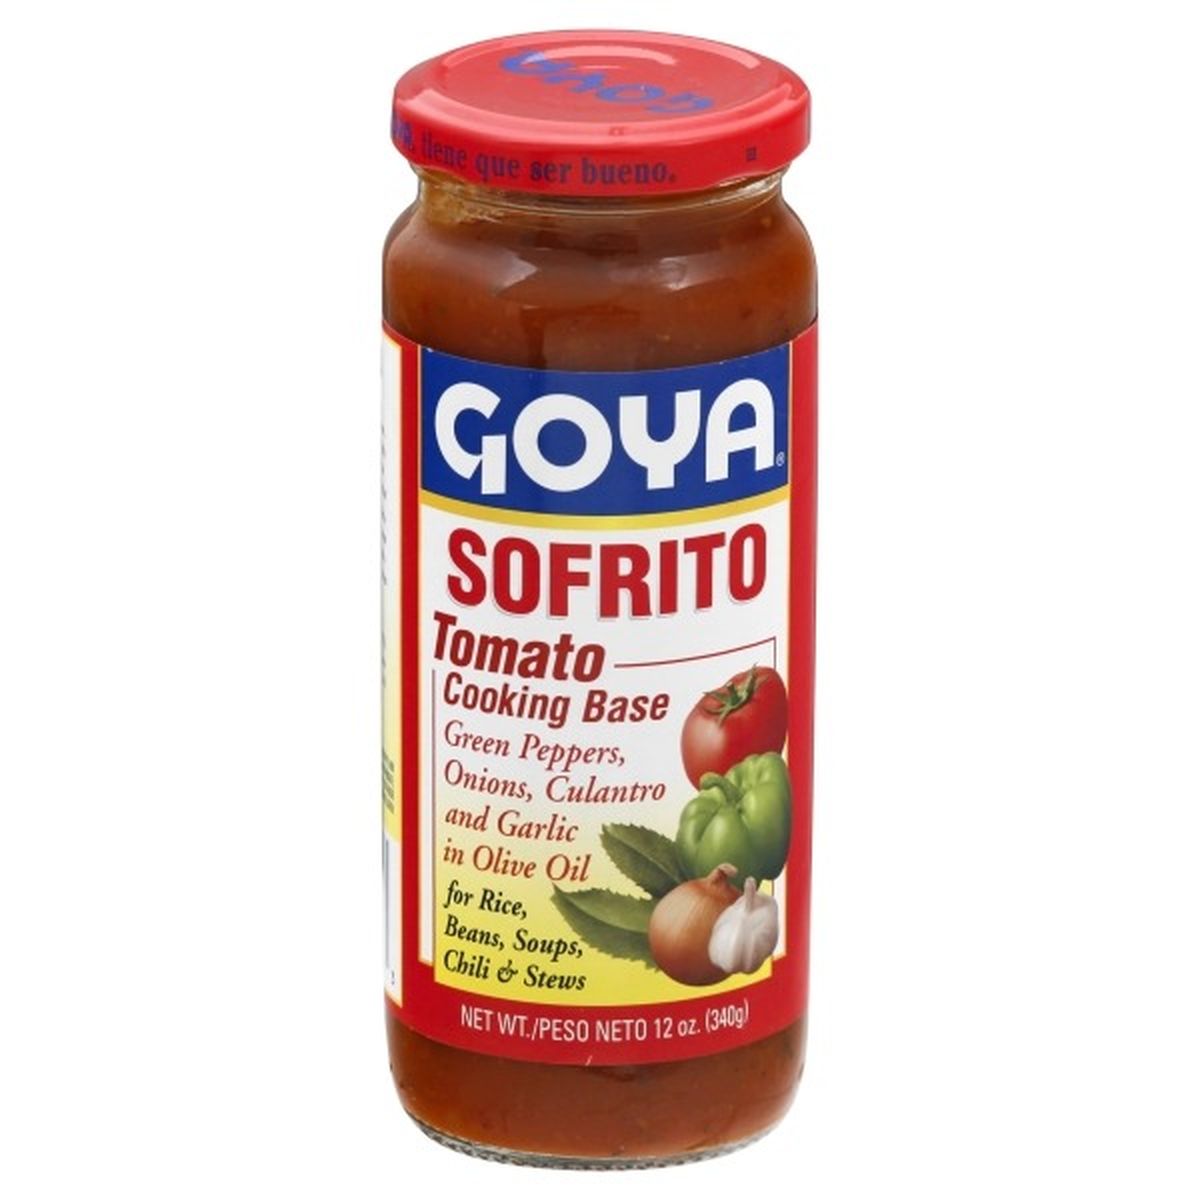 Calories in Goya Tomato Cooking Base, Sofrito